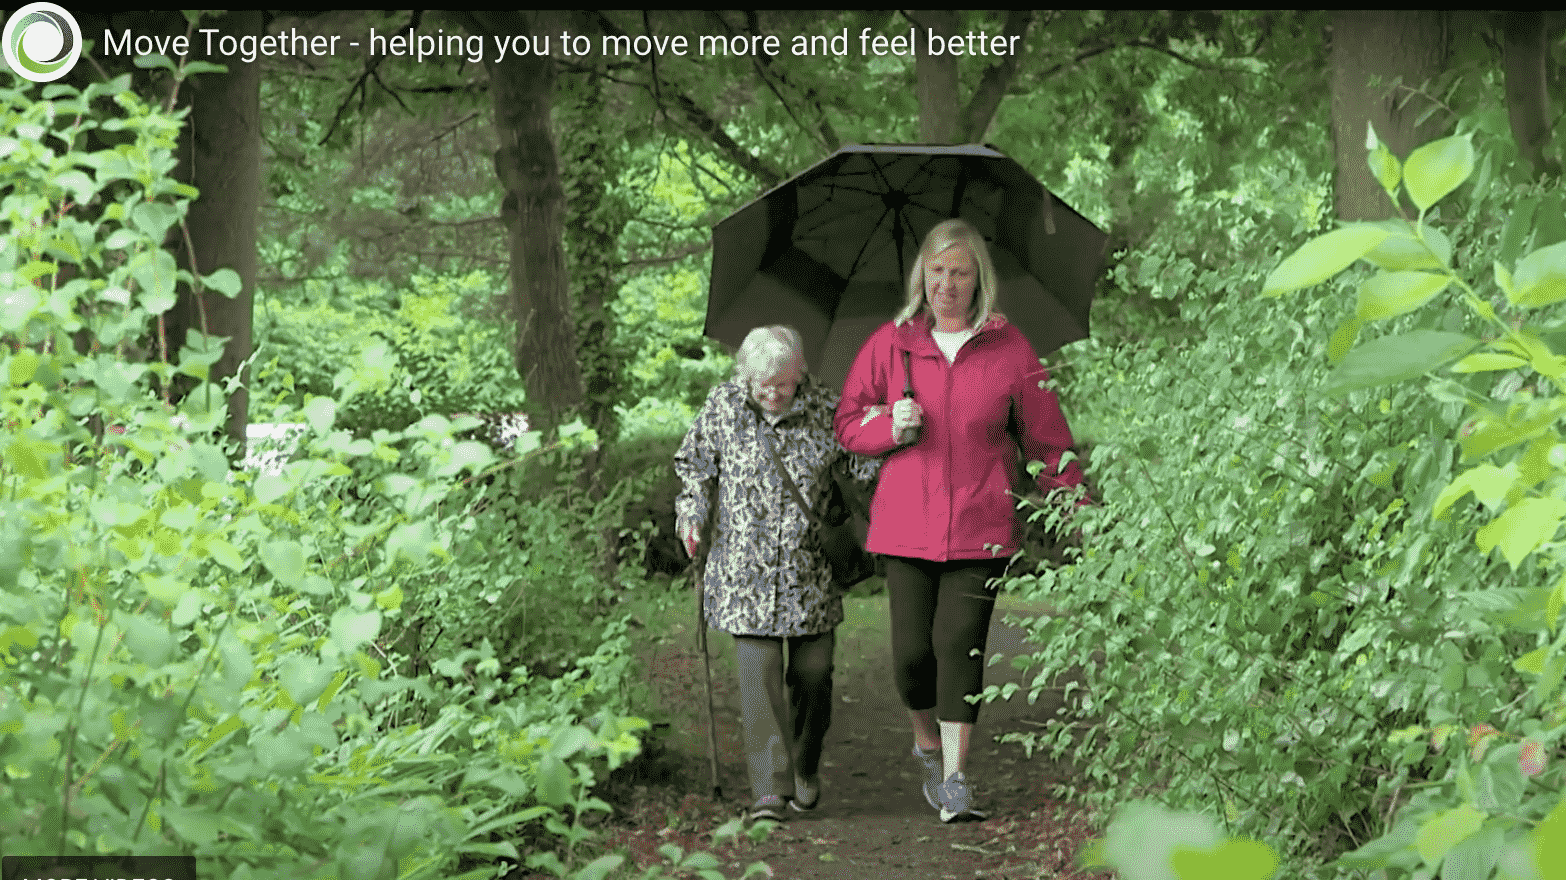 96 year old Majorie enjoying a walk in woods with another female working.